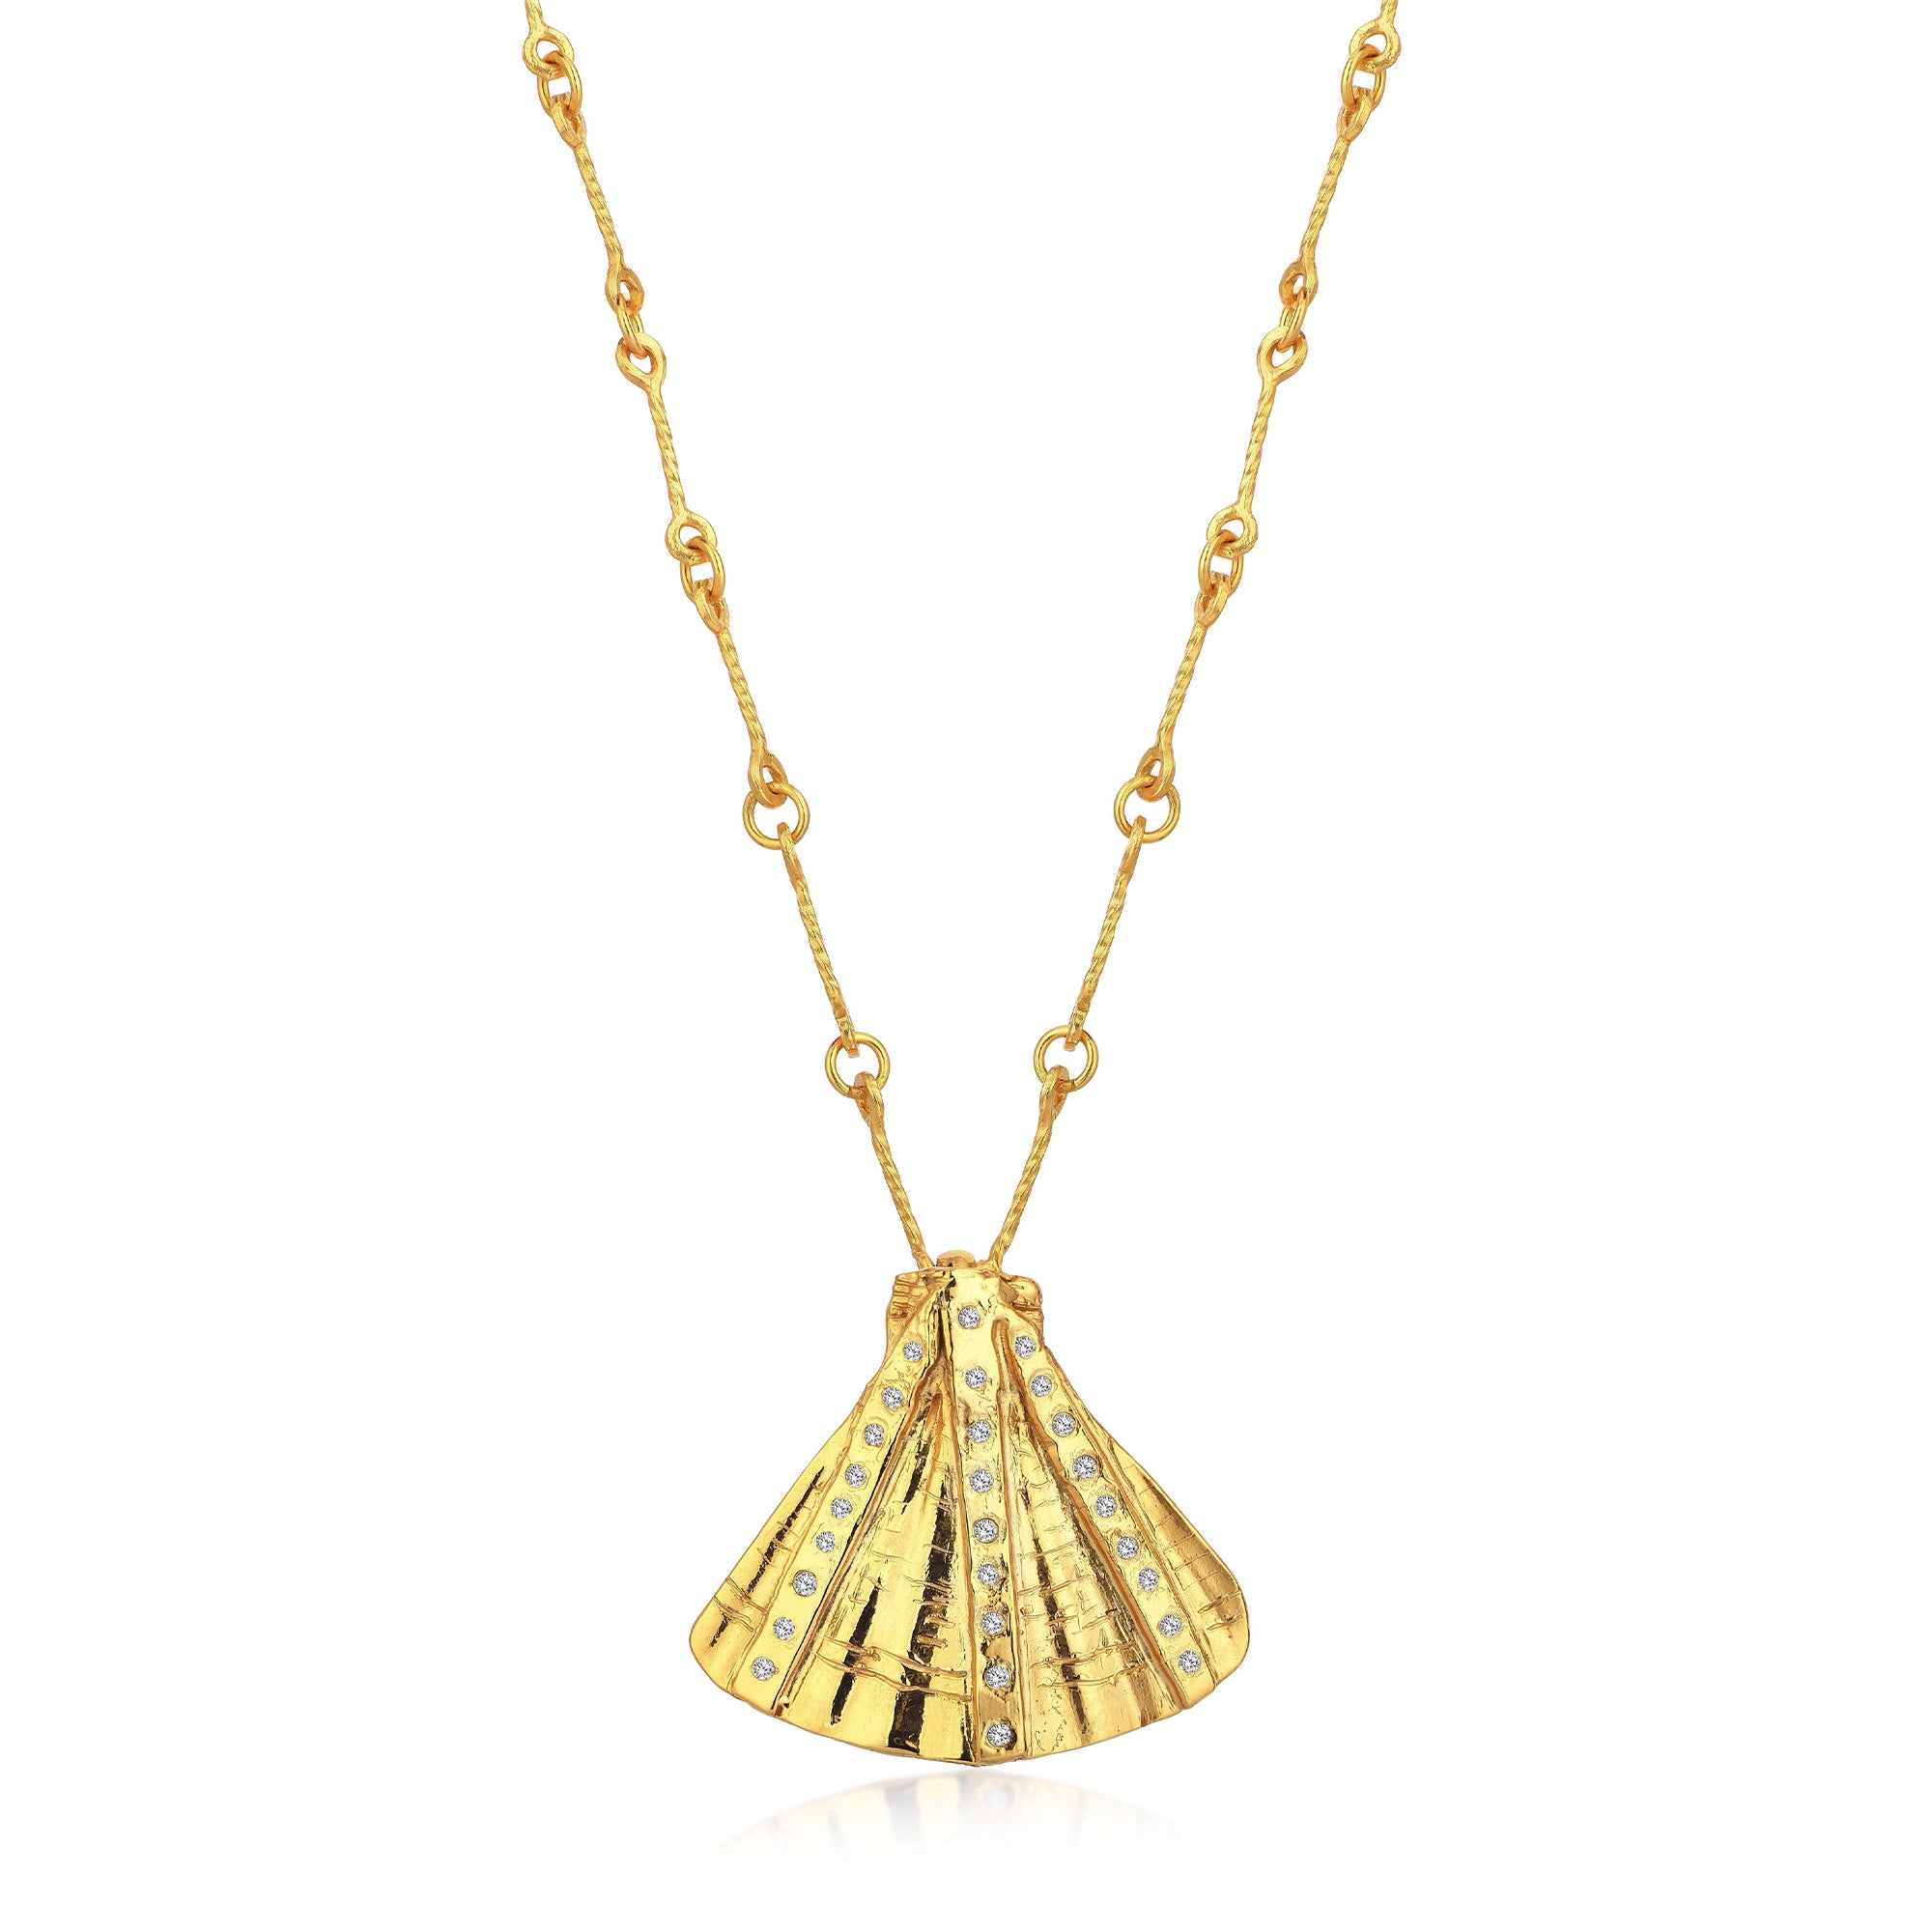 THE OSTERA NECKLACE